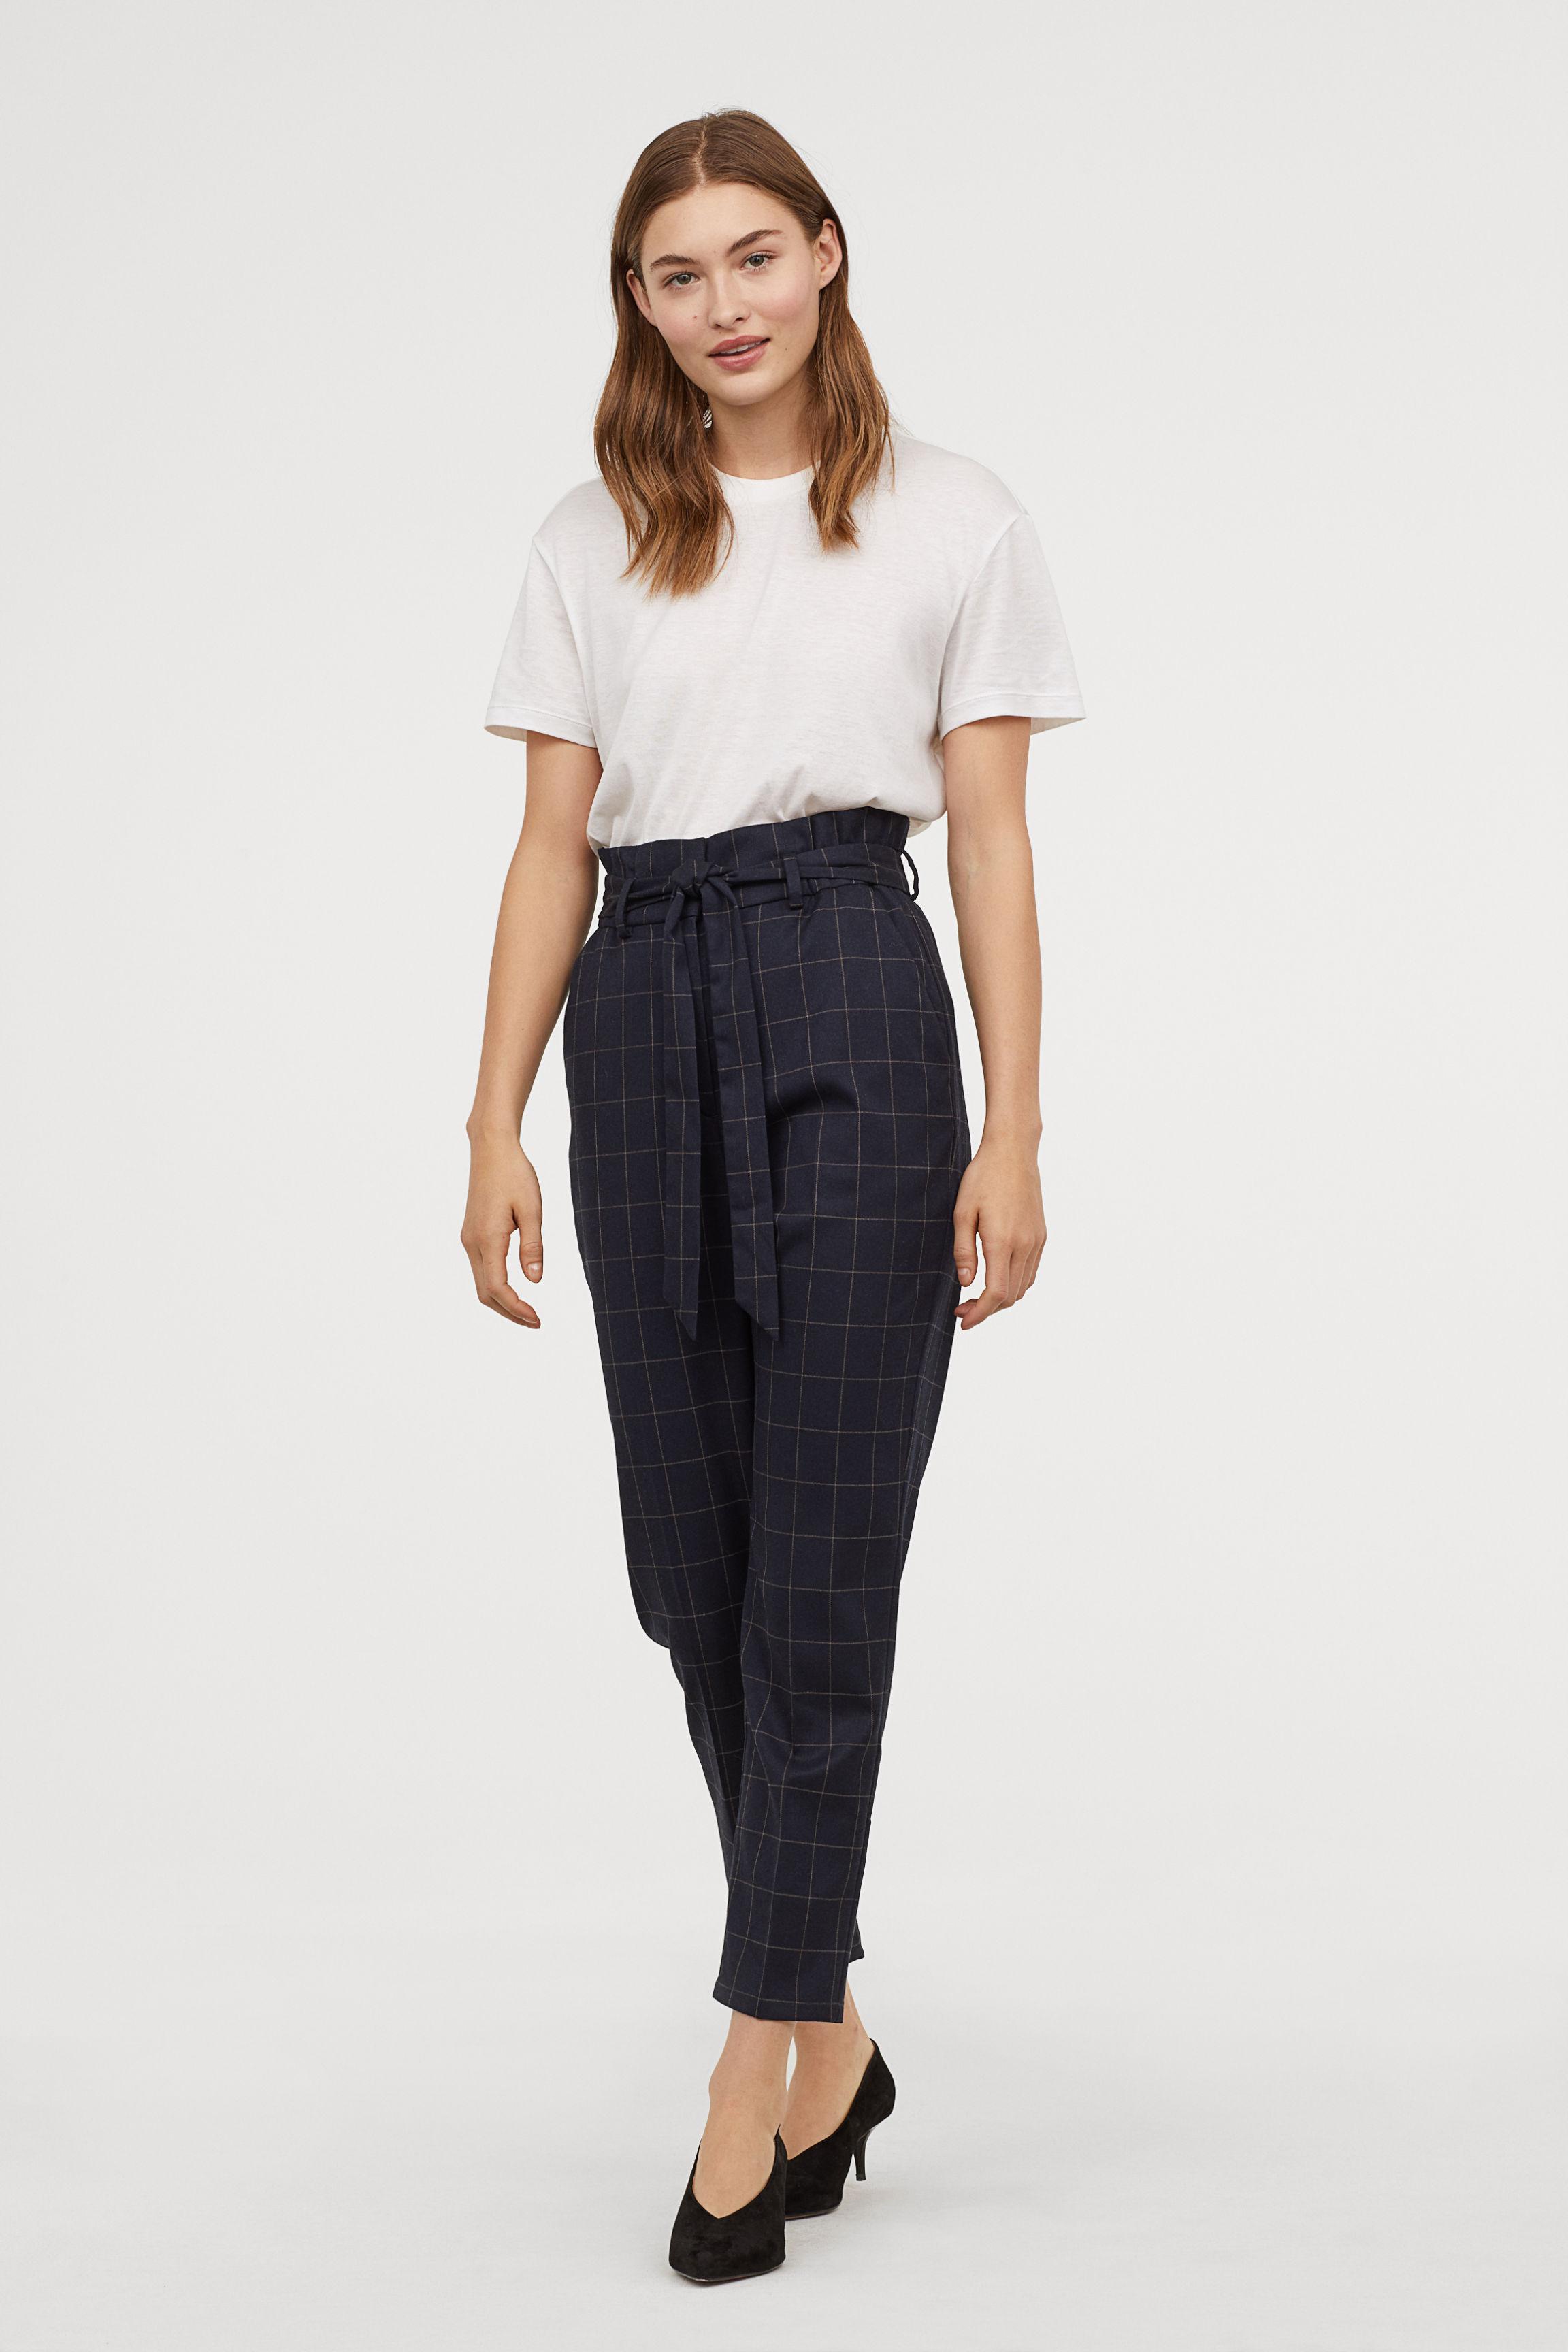 H&M Synthetic Paper-bag Pants in Dark Blue/Checked (Blue) | Lyst